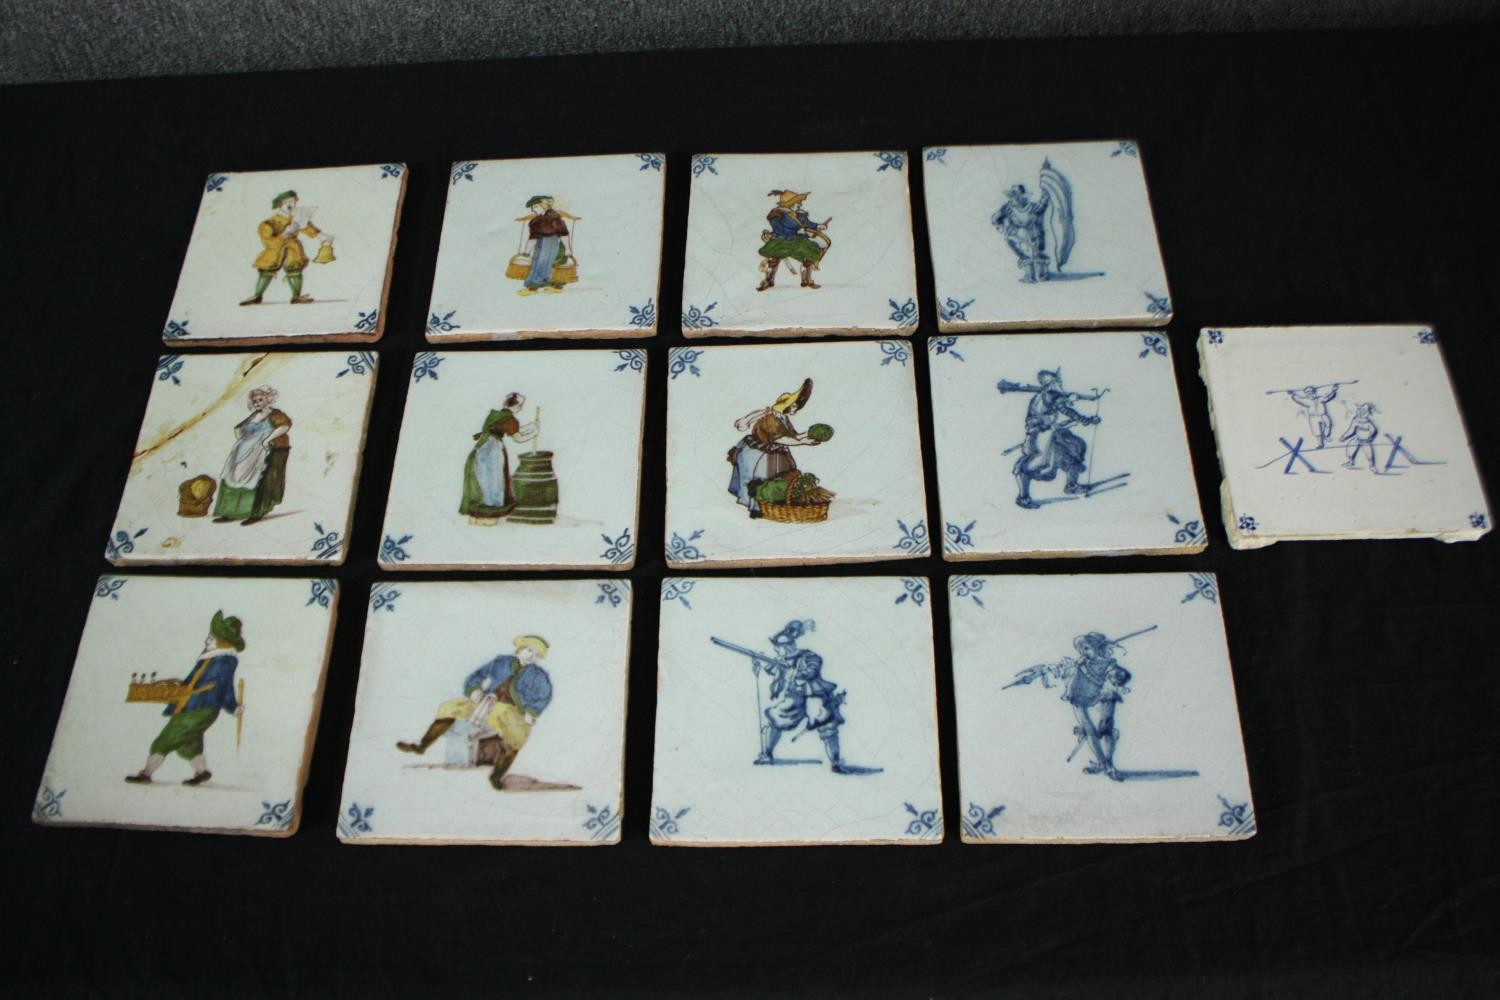 A set of thirteen early nineteenth century Dutch Makkum tiles. Eight hand painted and brightly